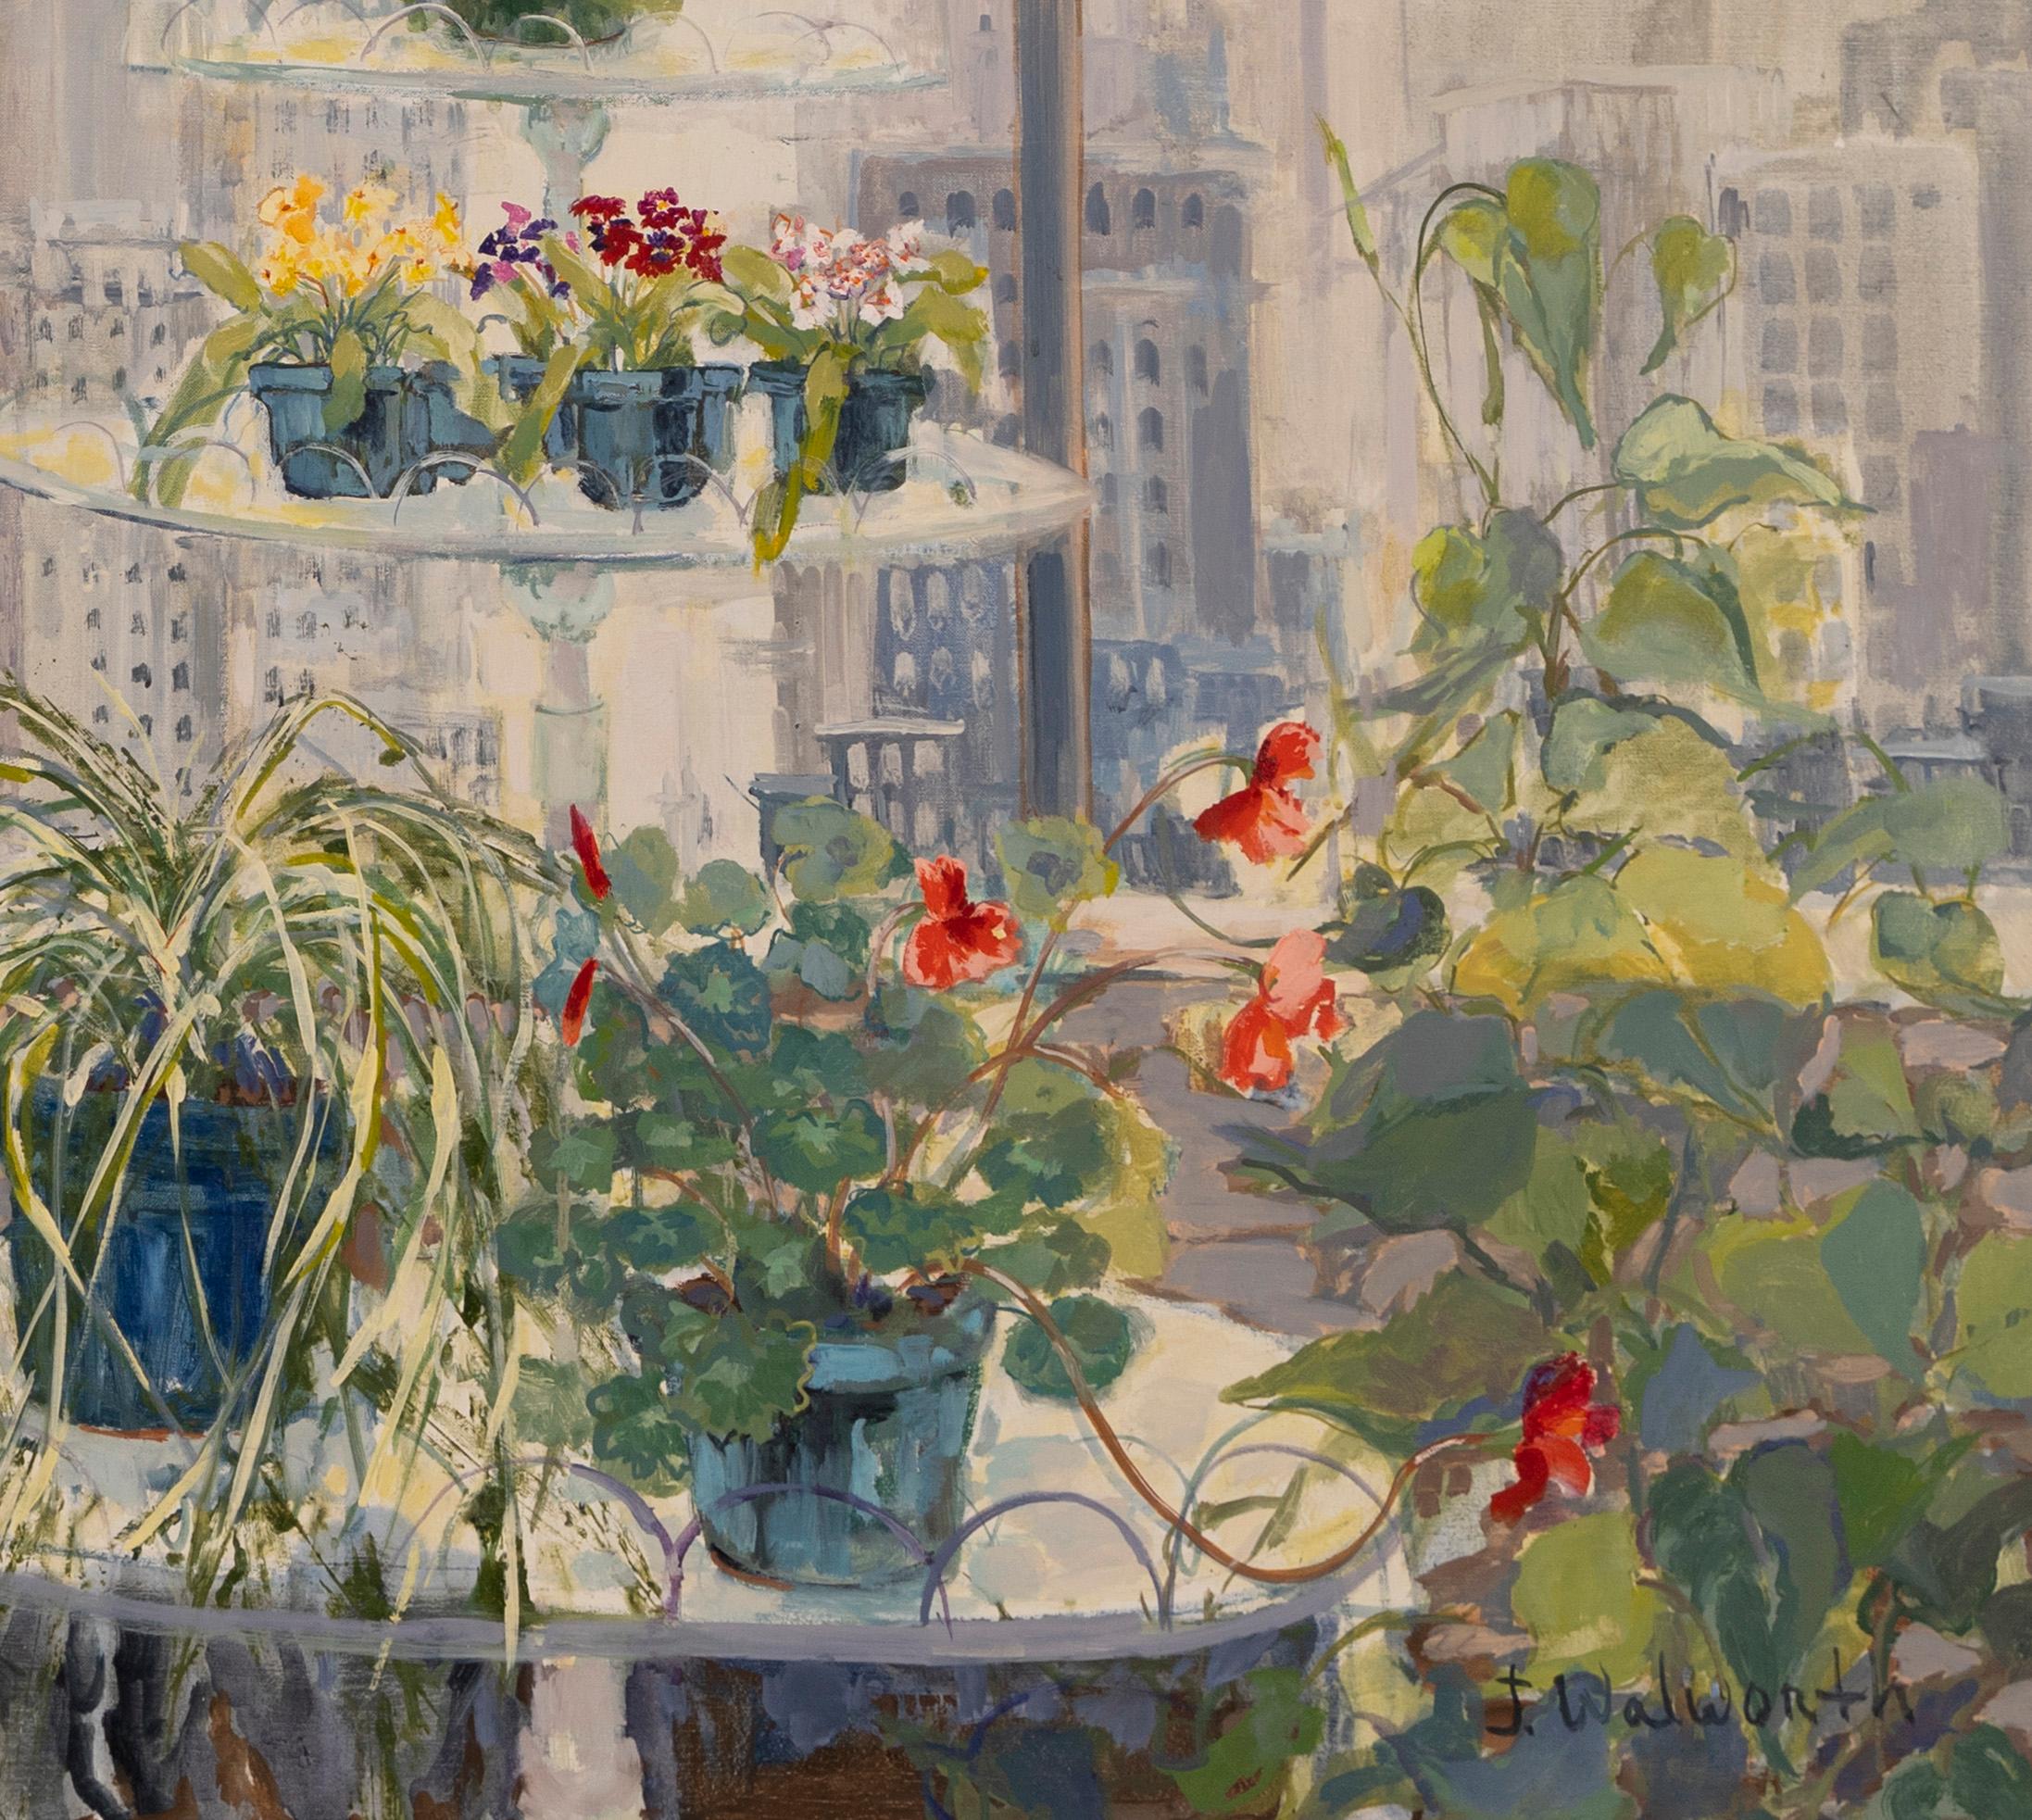 Vintage American school modernist oil painting of  a New York City street scene thru a plant covered balcony.  Oil on canvas, circa 1950.  Signed.  Image size, 50L x 36H.  Framed